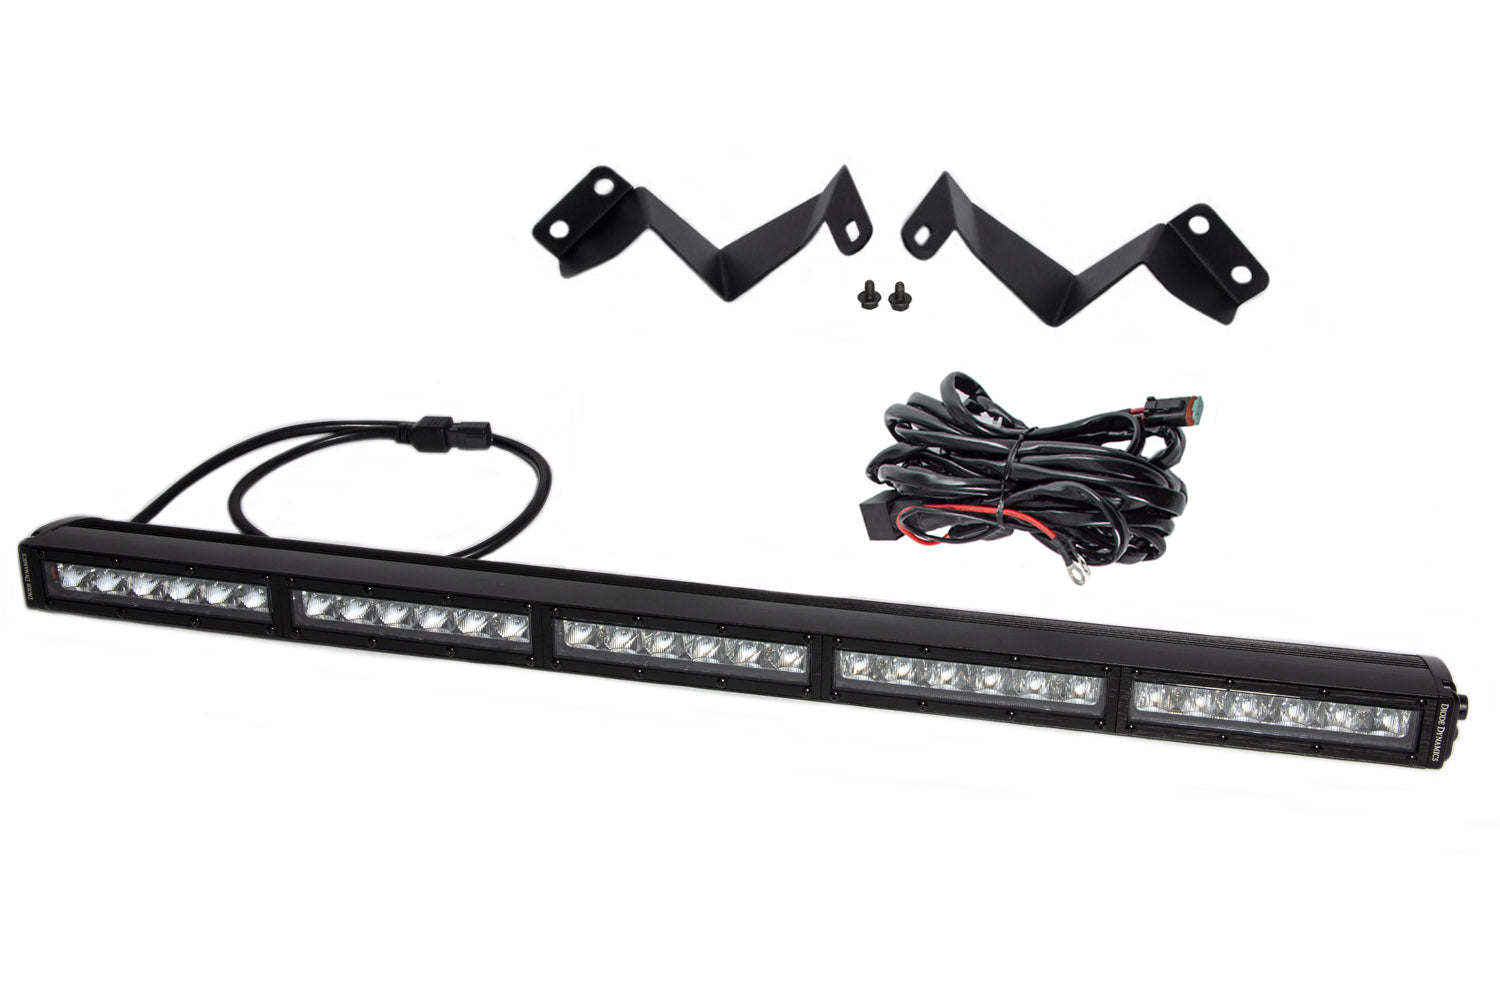 Diode Dynamics 2016-2021 Toyota Tacoma White Driving Stage Series SS30 Stealth Lightbar Kit DD6070